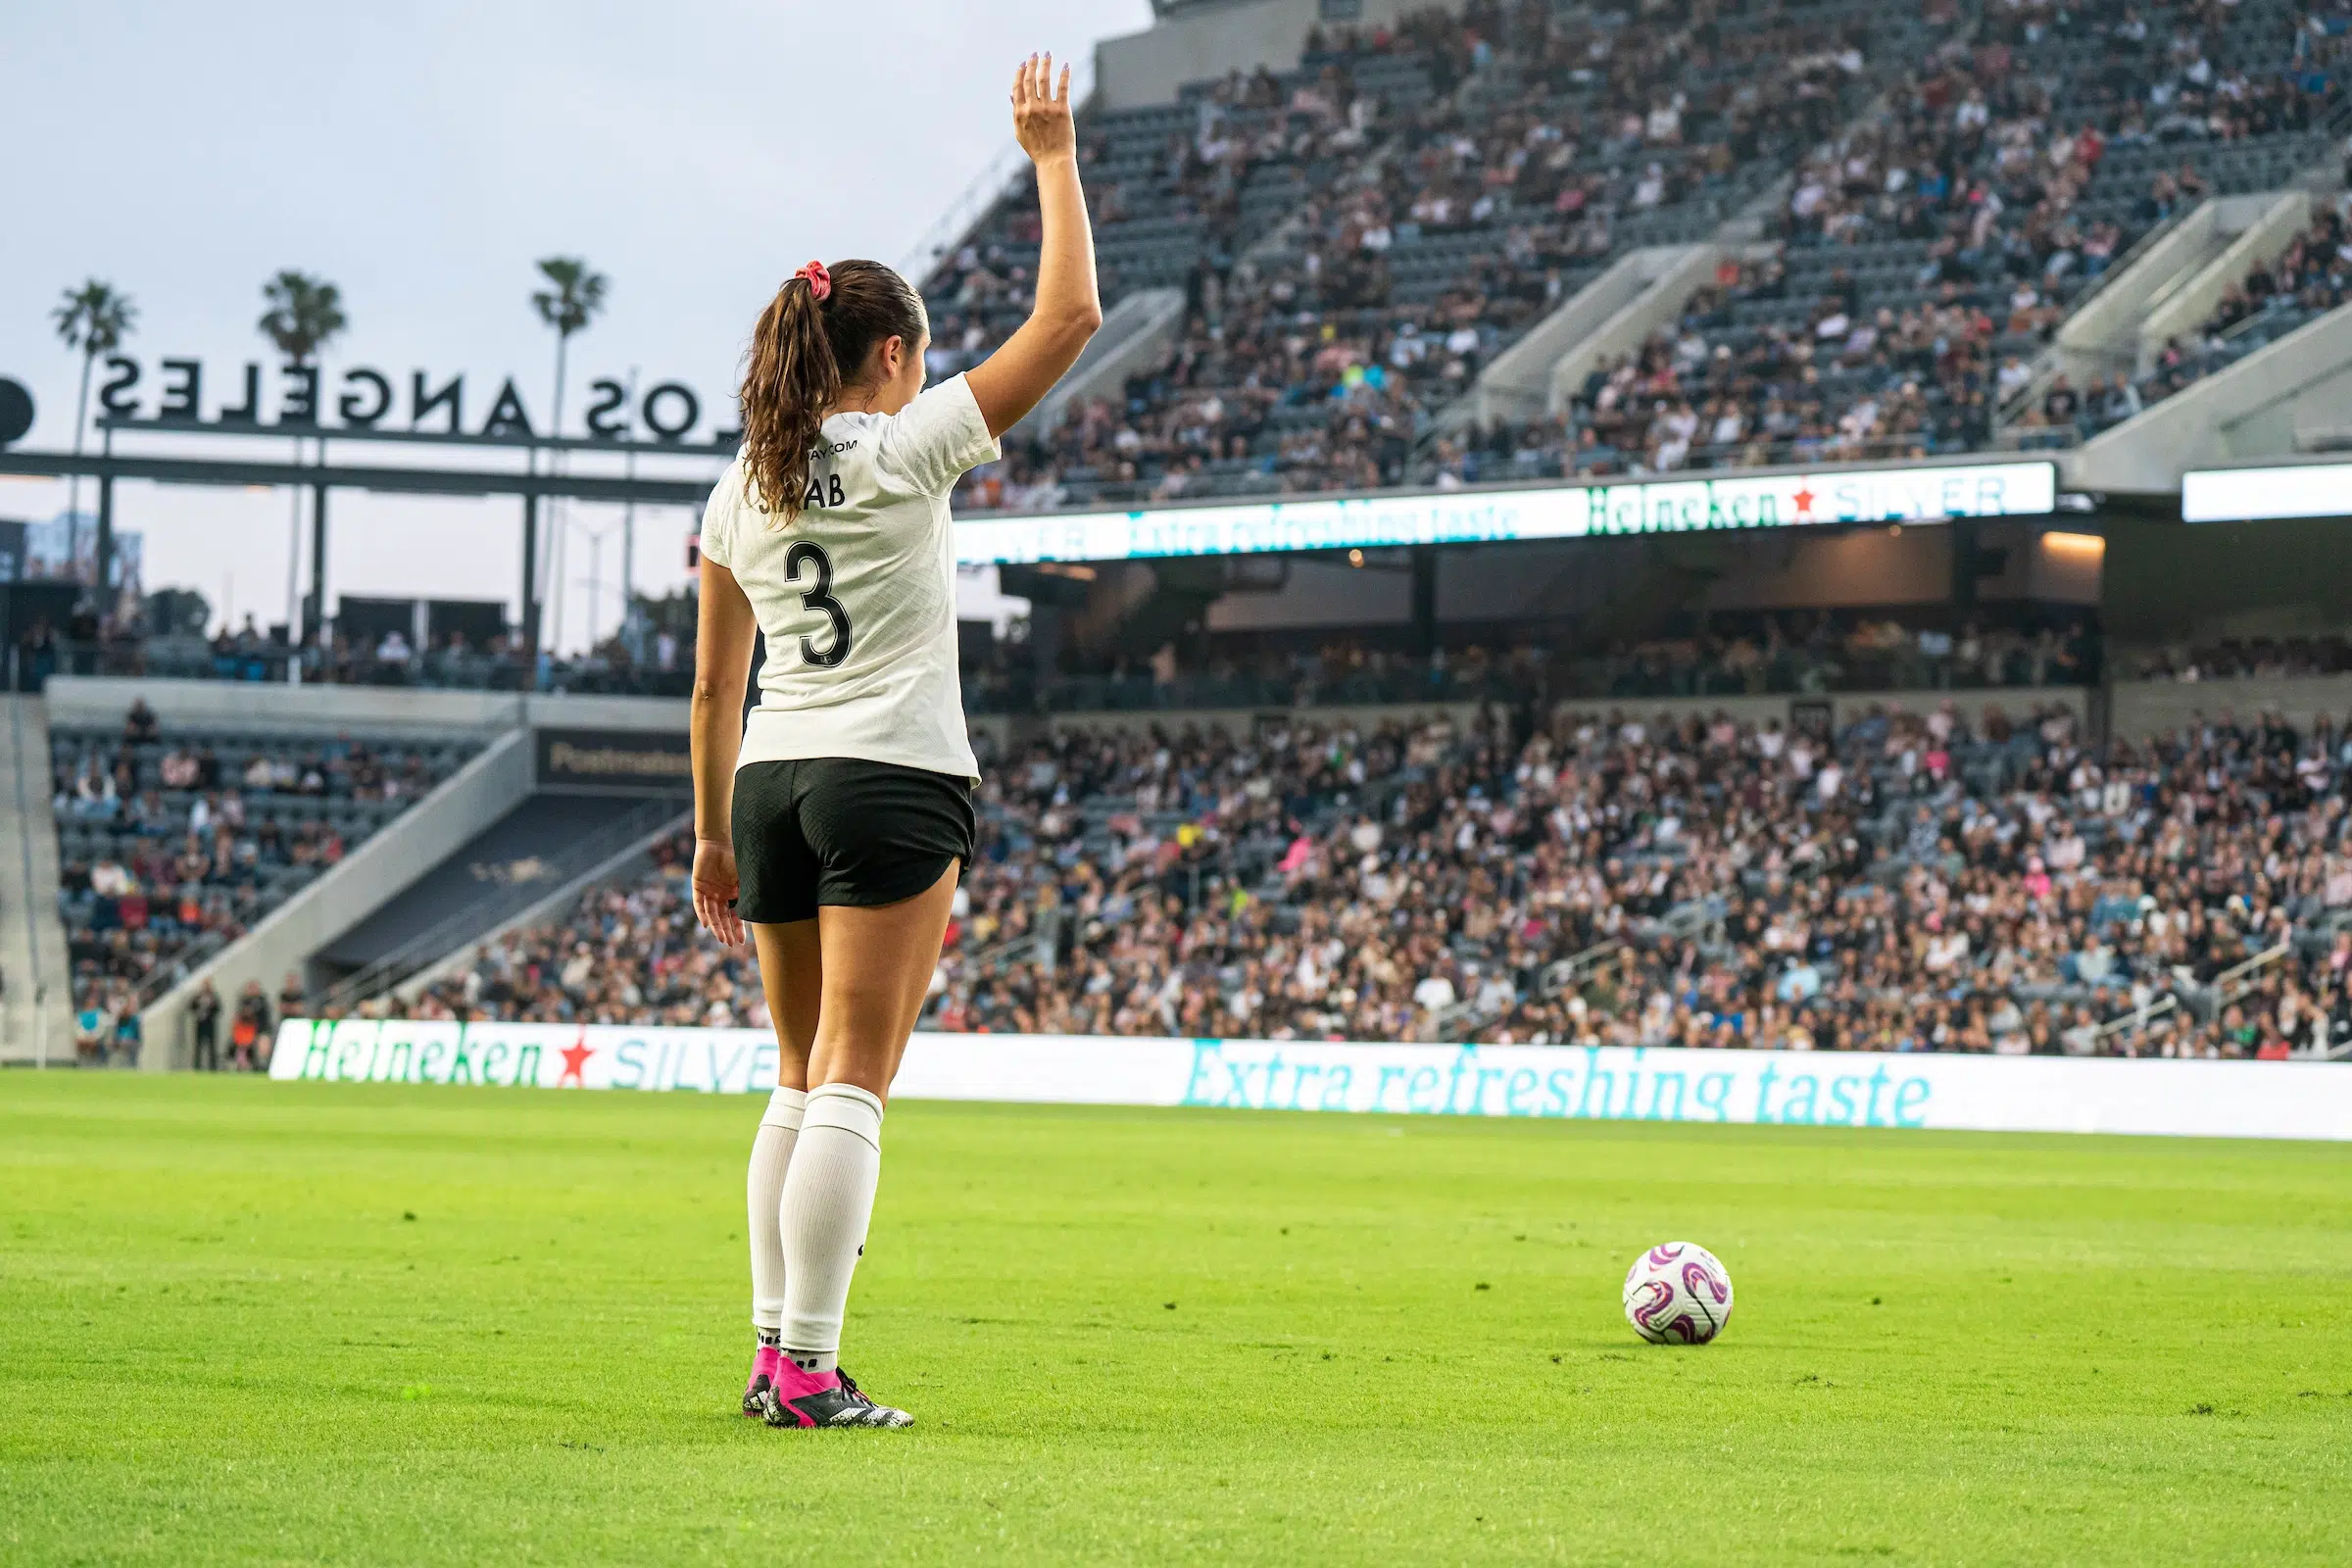 Sam Staab in a white top, black shorts and white socks lifts her hand as she waits to take a free kick.